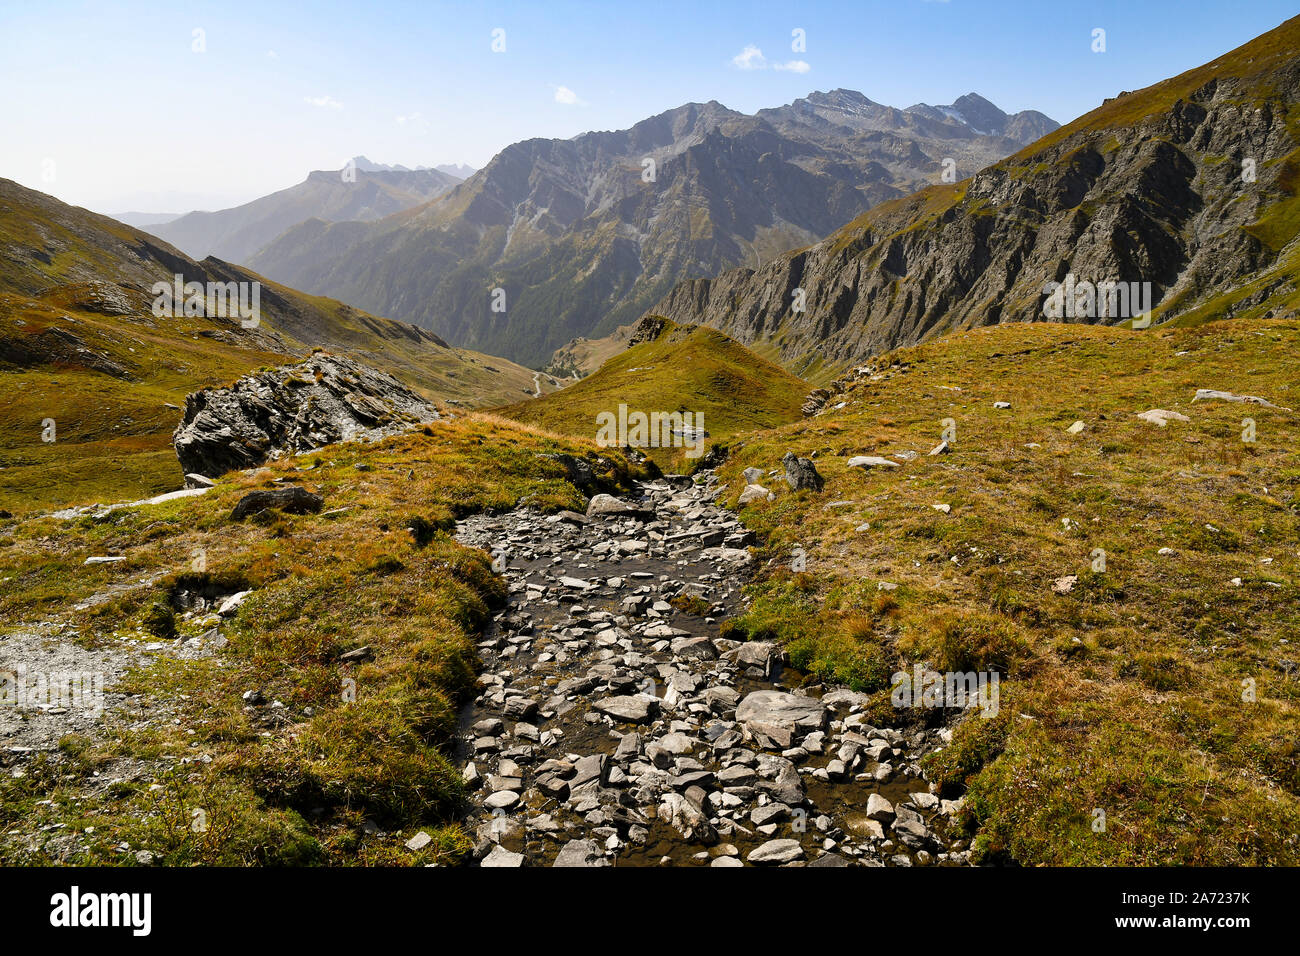 Scenic view of Colle dell'Agnello mountain pass in the Italian Alps with a stream and rocky peaks in late summer, Chianale, Cuneo, Piedmont, Italy Stock Photo